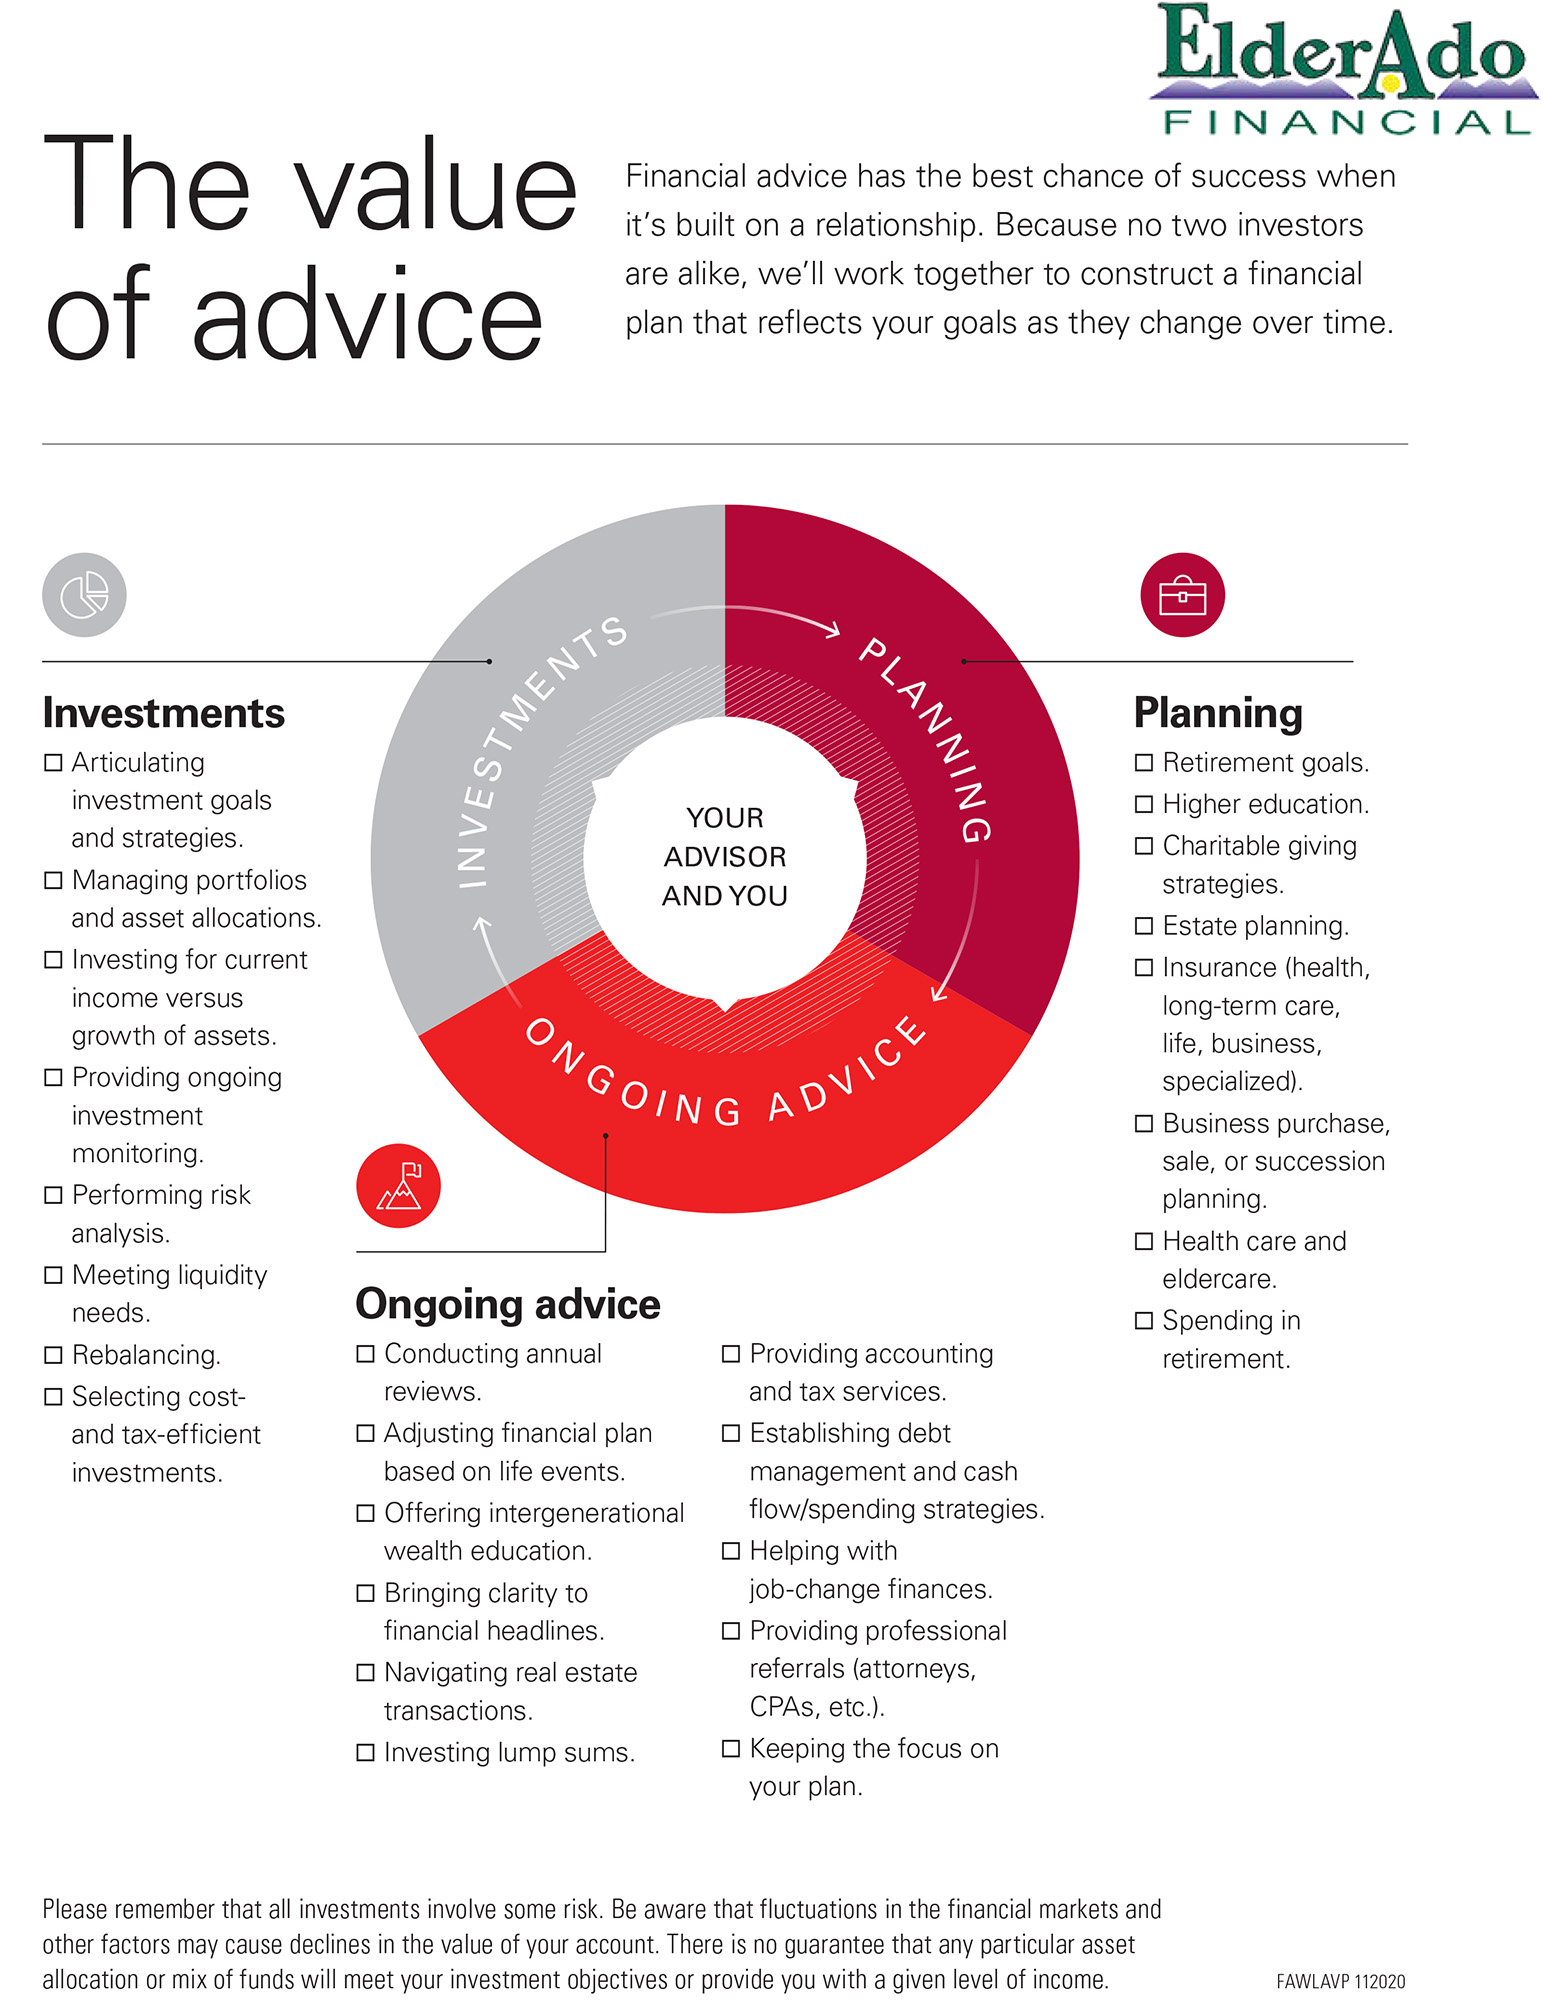 The value of advice infographic